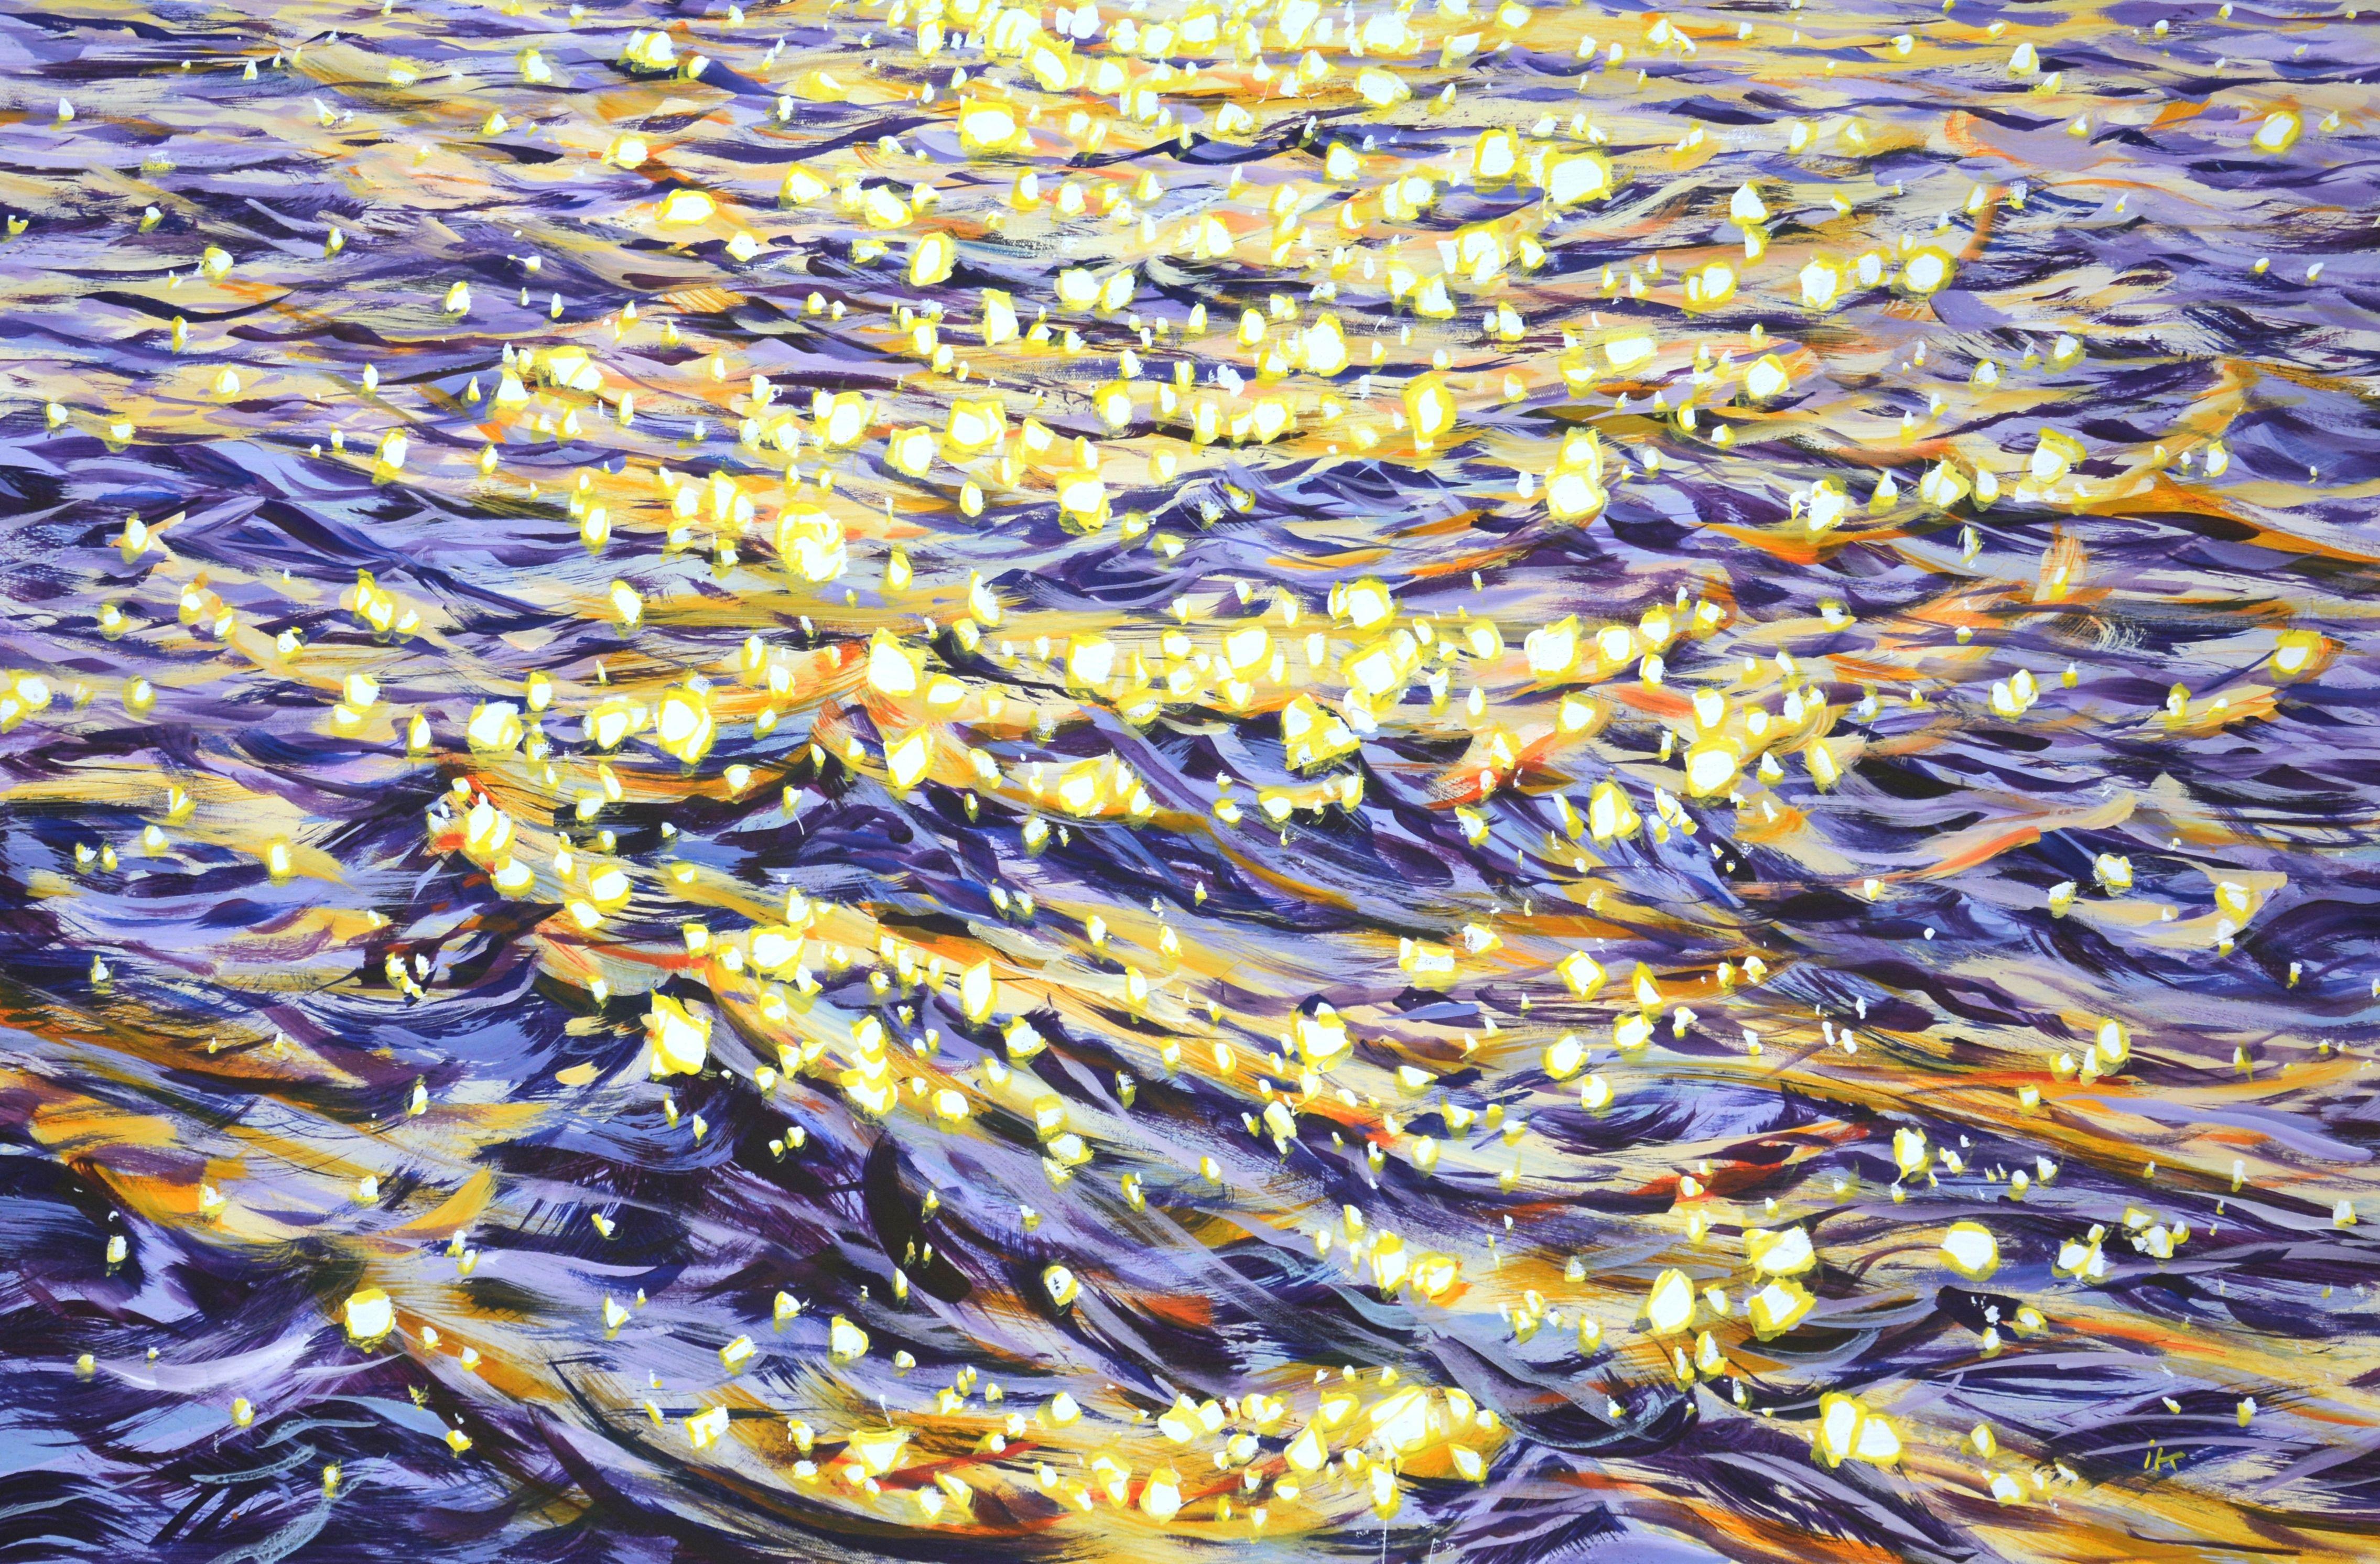 Dance of glare on the water 2. Evening, warm water, waves, serene views, ocean shine, evening sun glare on the water create an atmosphere of relaxation and romance. Made in the style of realism, a calm gray palette with warm water and golden